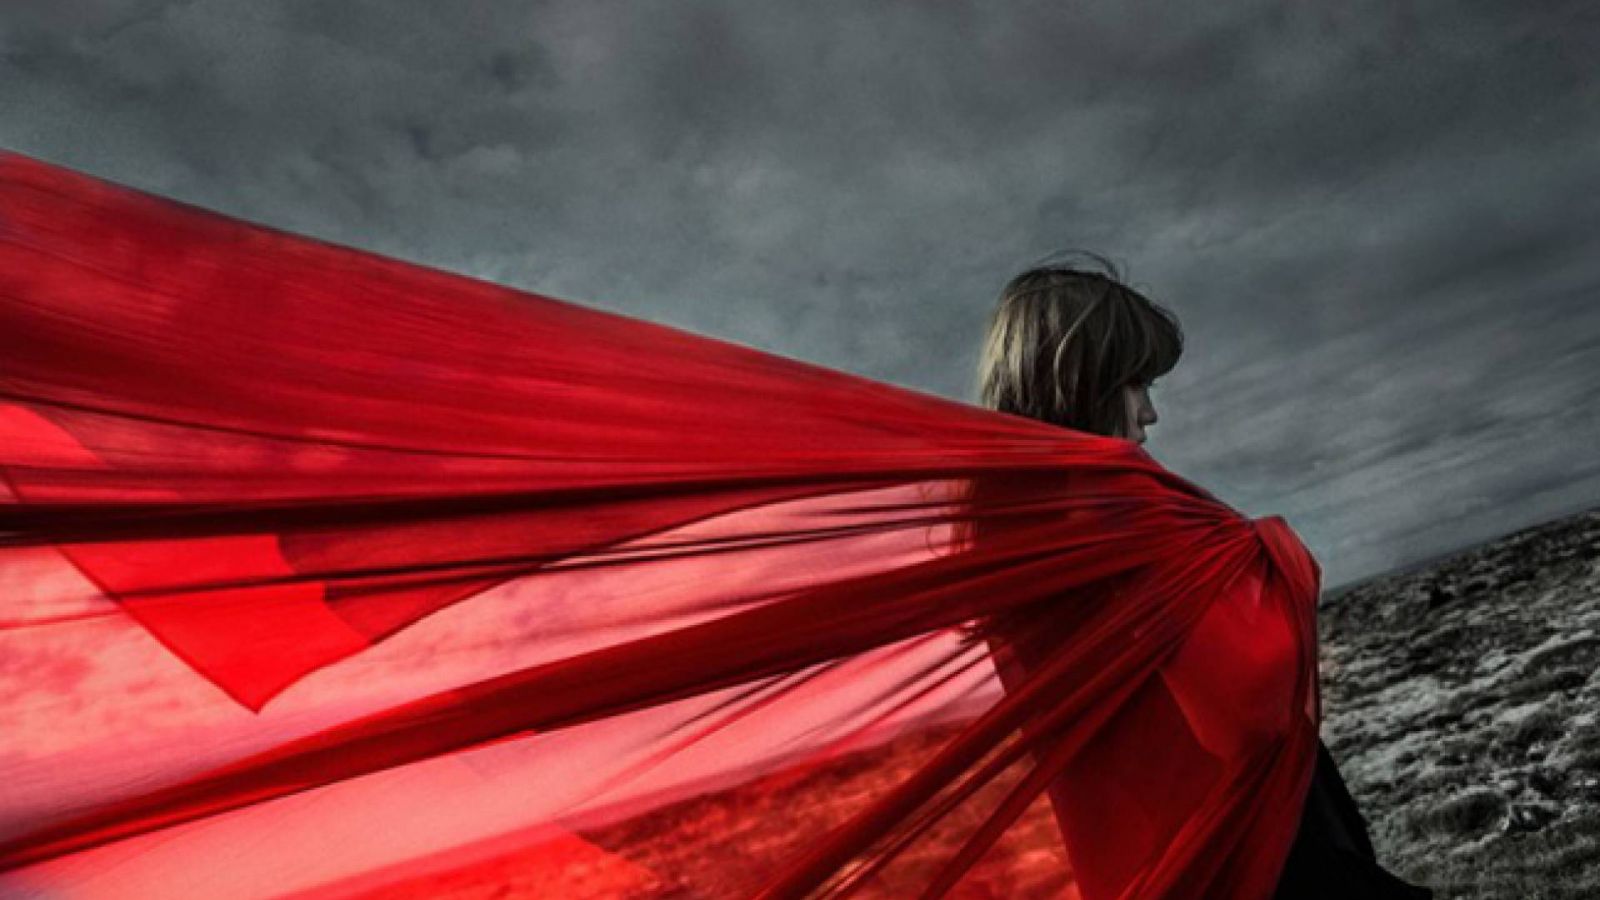 New Album from Aimer © SonyMusic. All rights reserved.